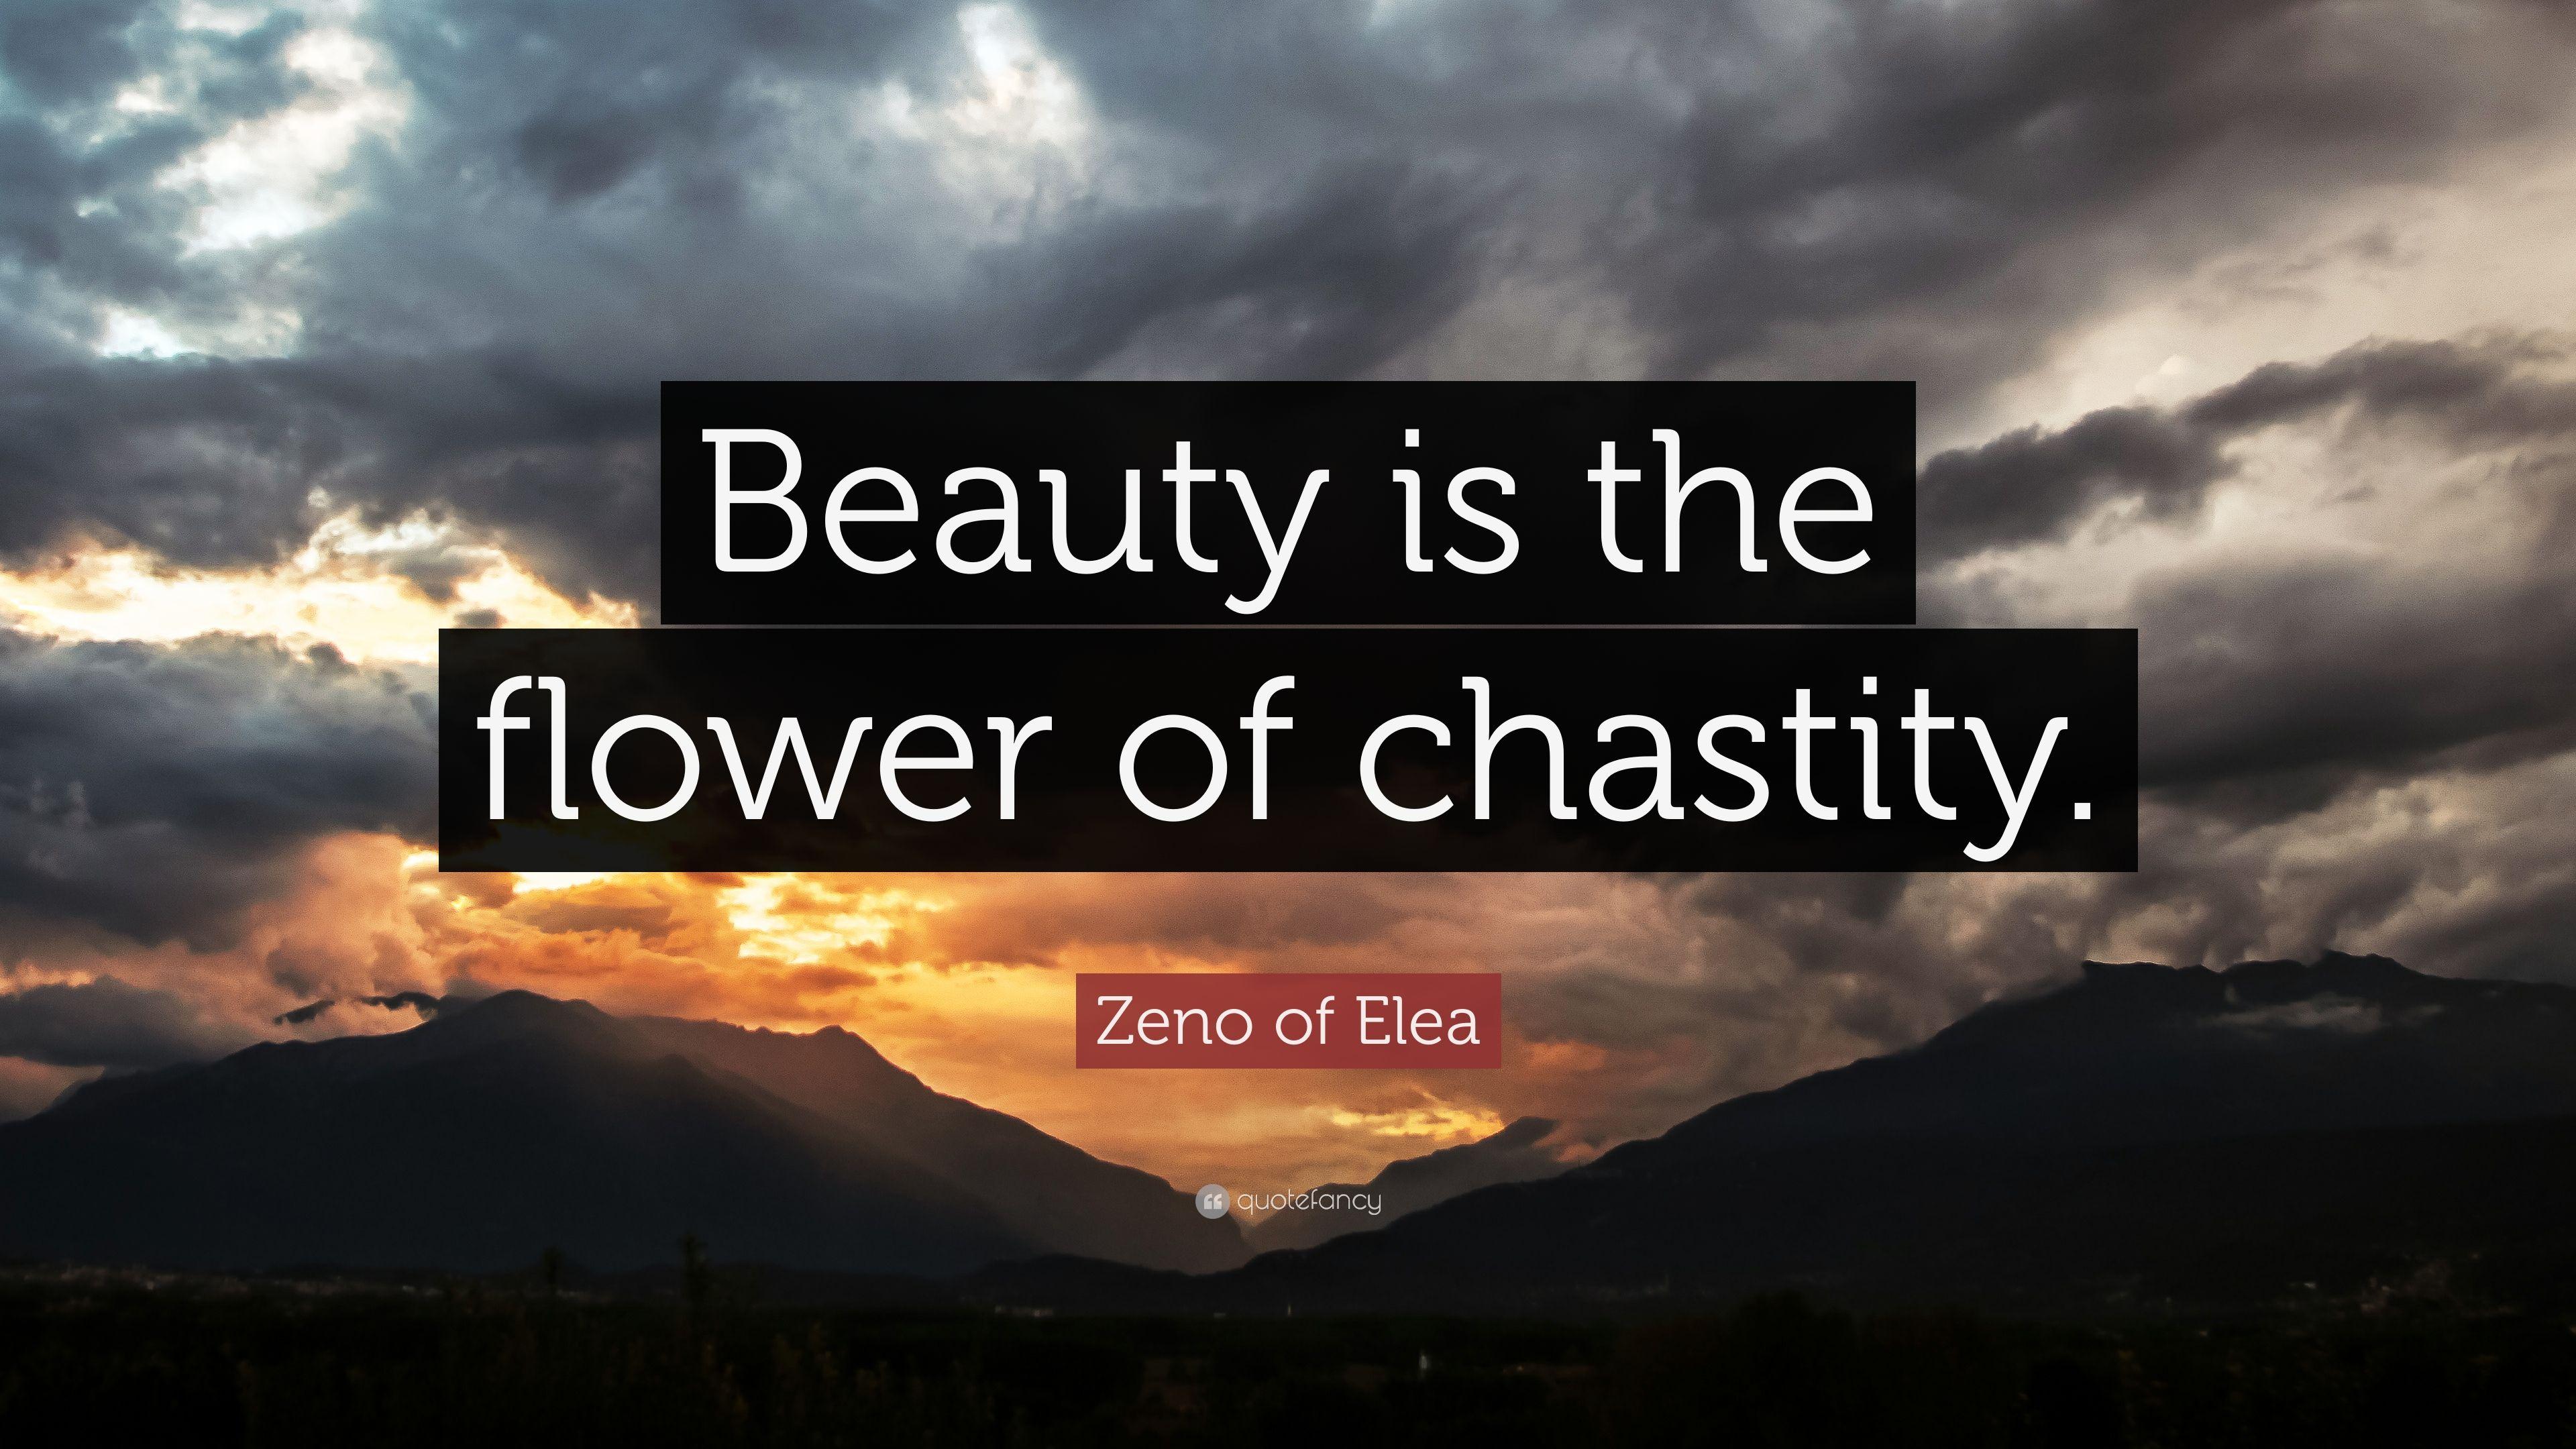 Zeno of Elea Quote: “Beauty is the flower of chastity.” 9